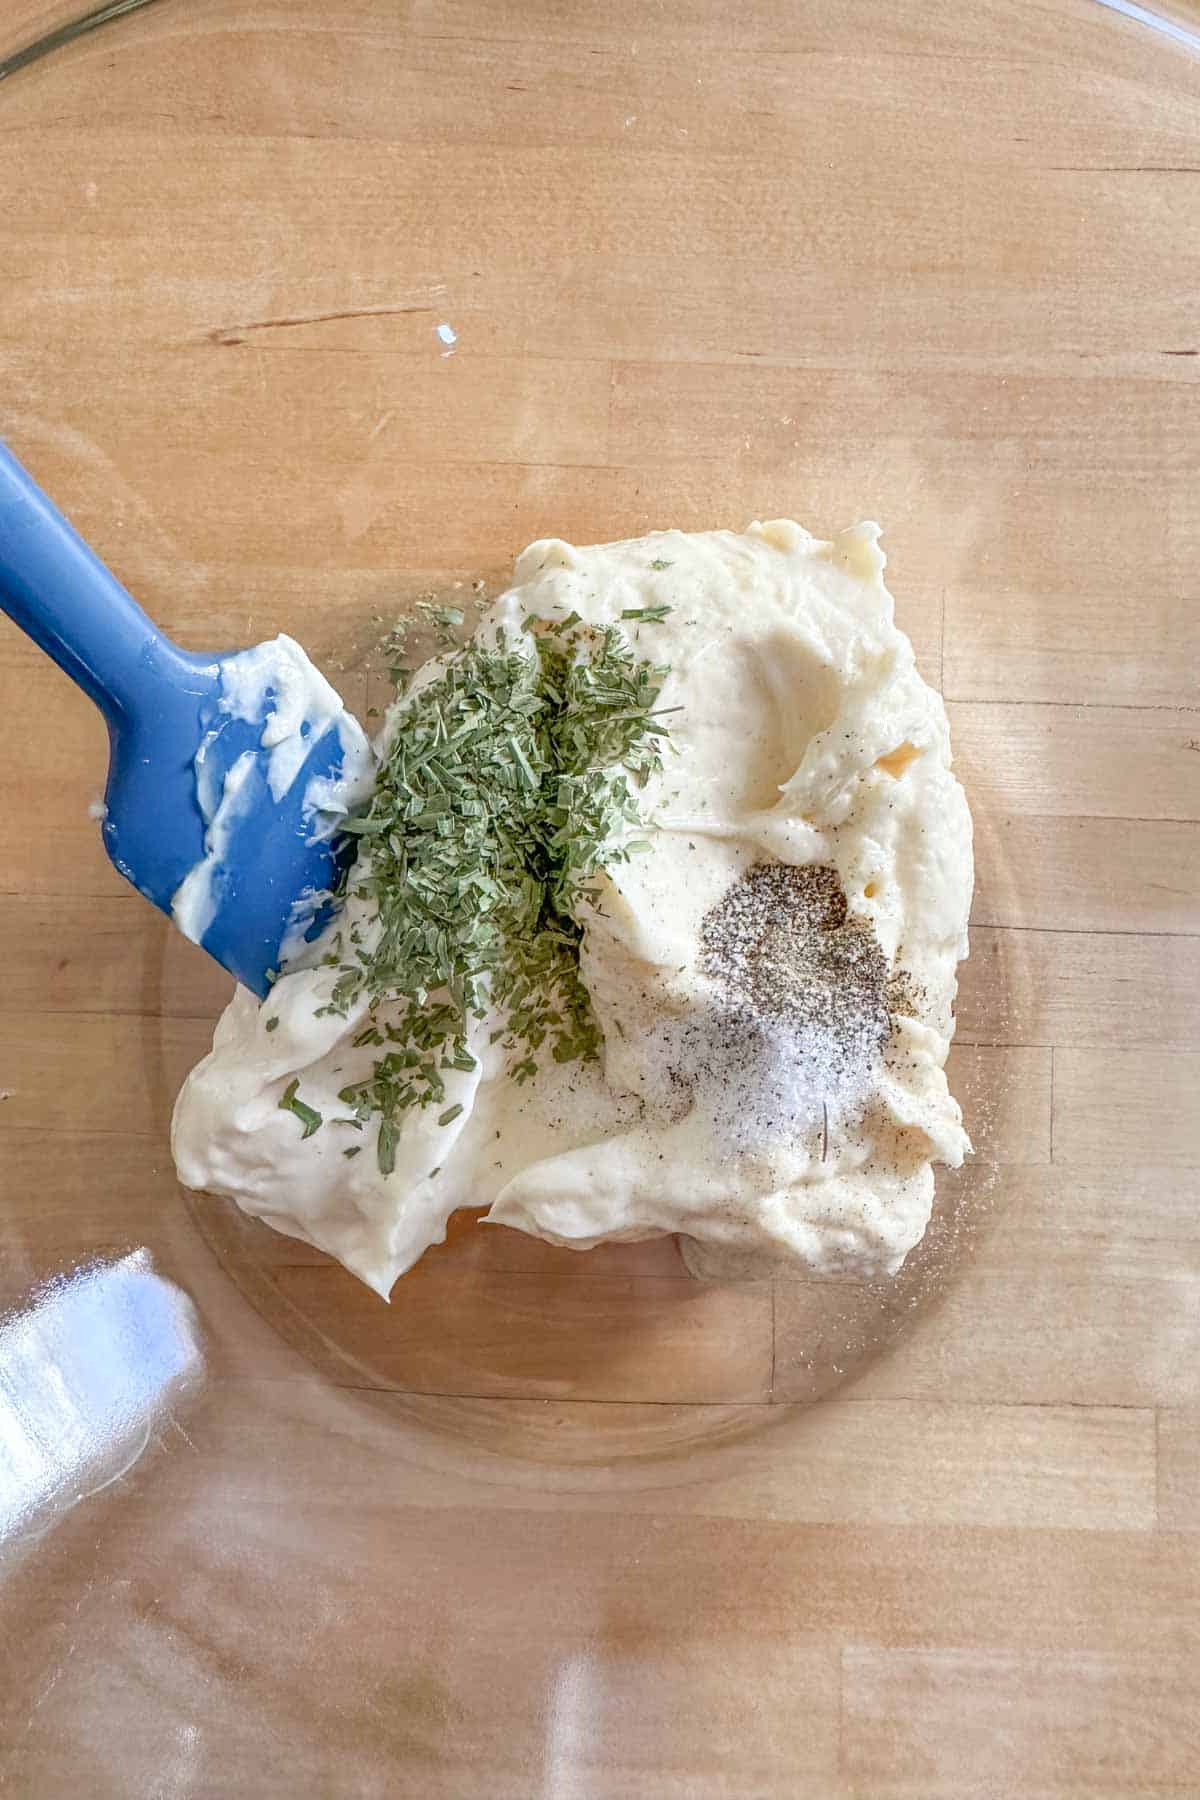 Mayonnaise, tarragon, salt, and pepper in a glass mixing bowl.